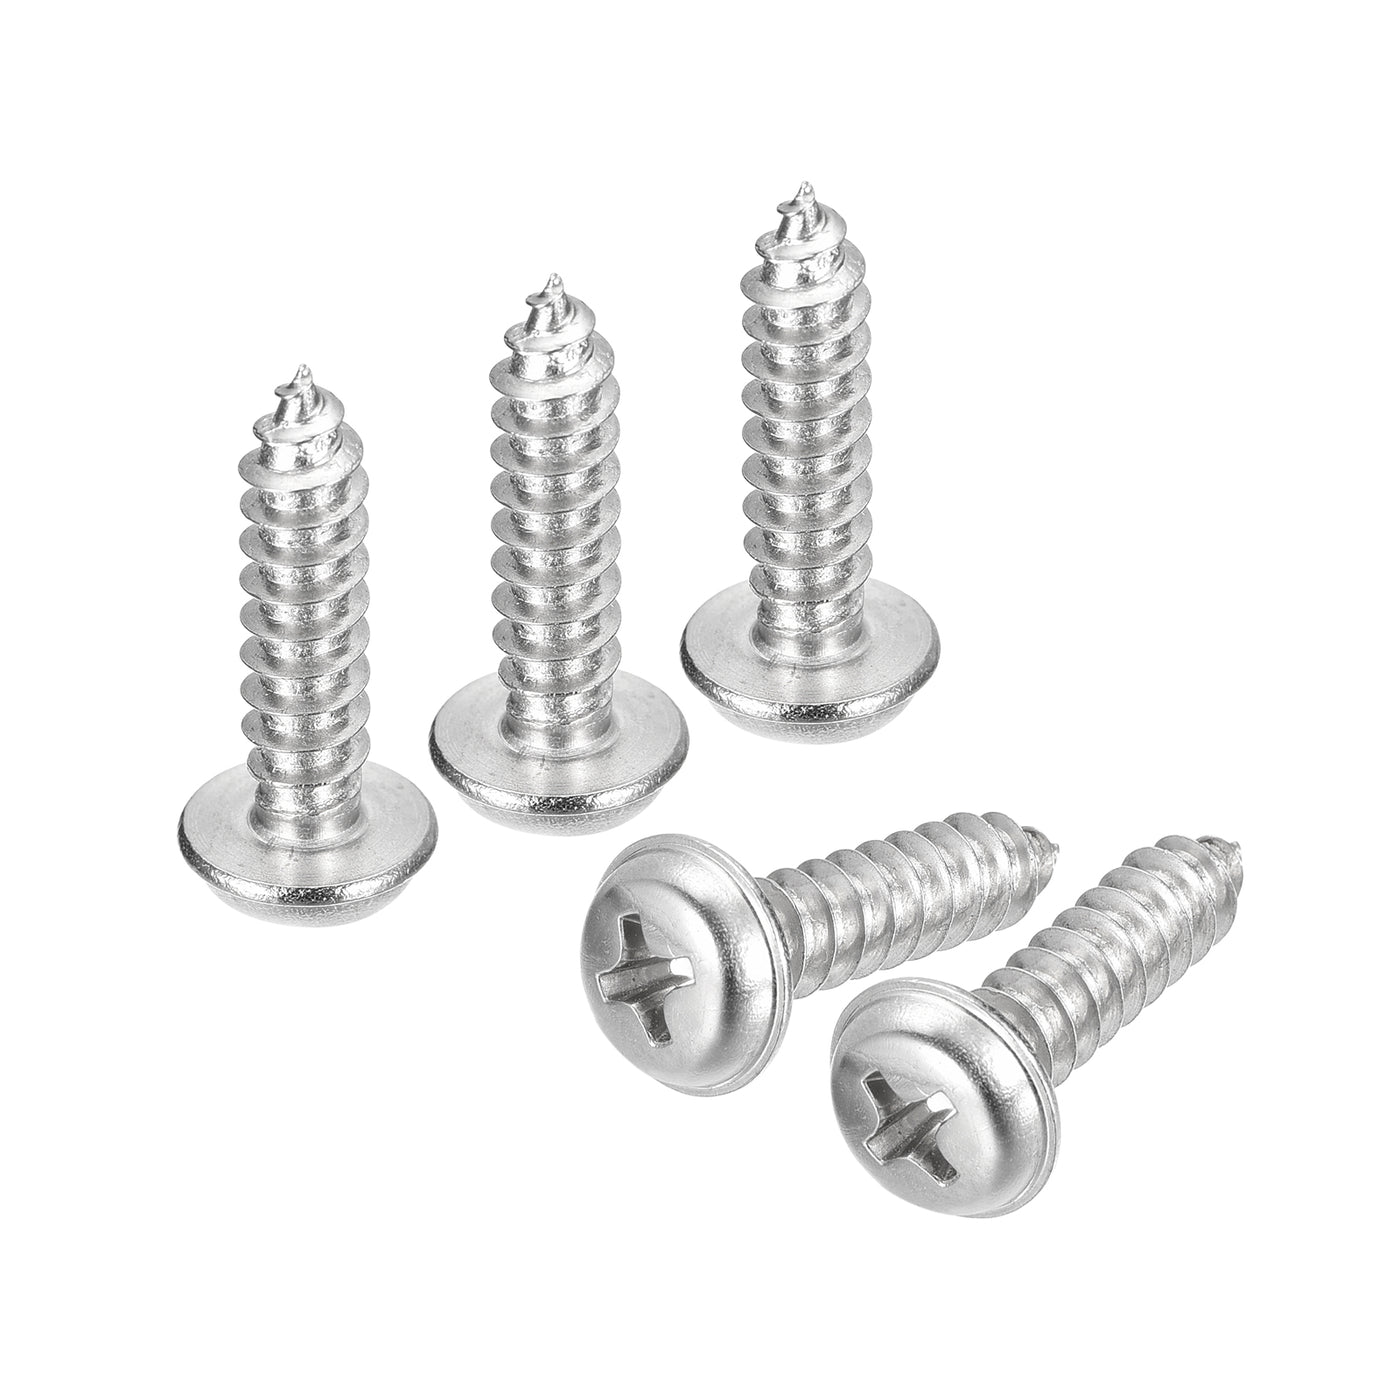 uxcell Uxcell ST5x20mm Phillips Pan Head Self-tapping Screw with Washer, 50pcs - 304 Stainless Steel Wood Screw Full Thread (Silver)